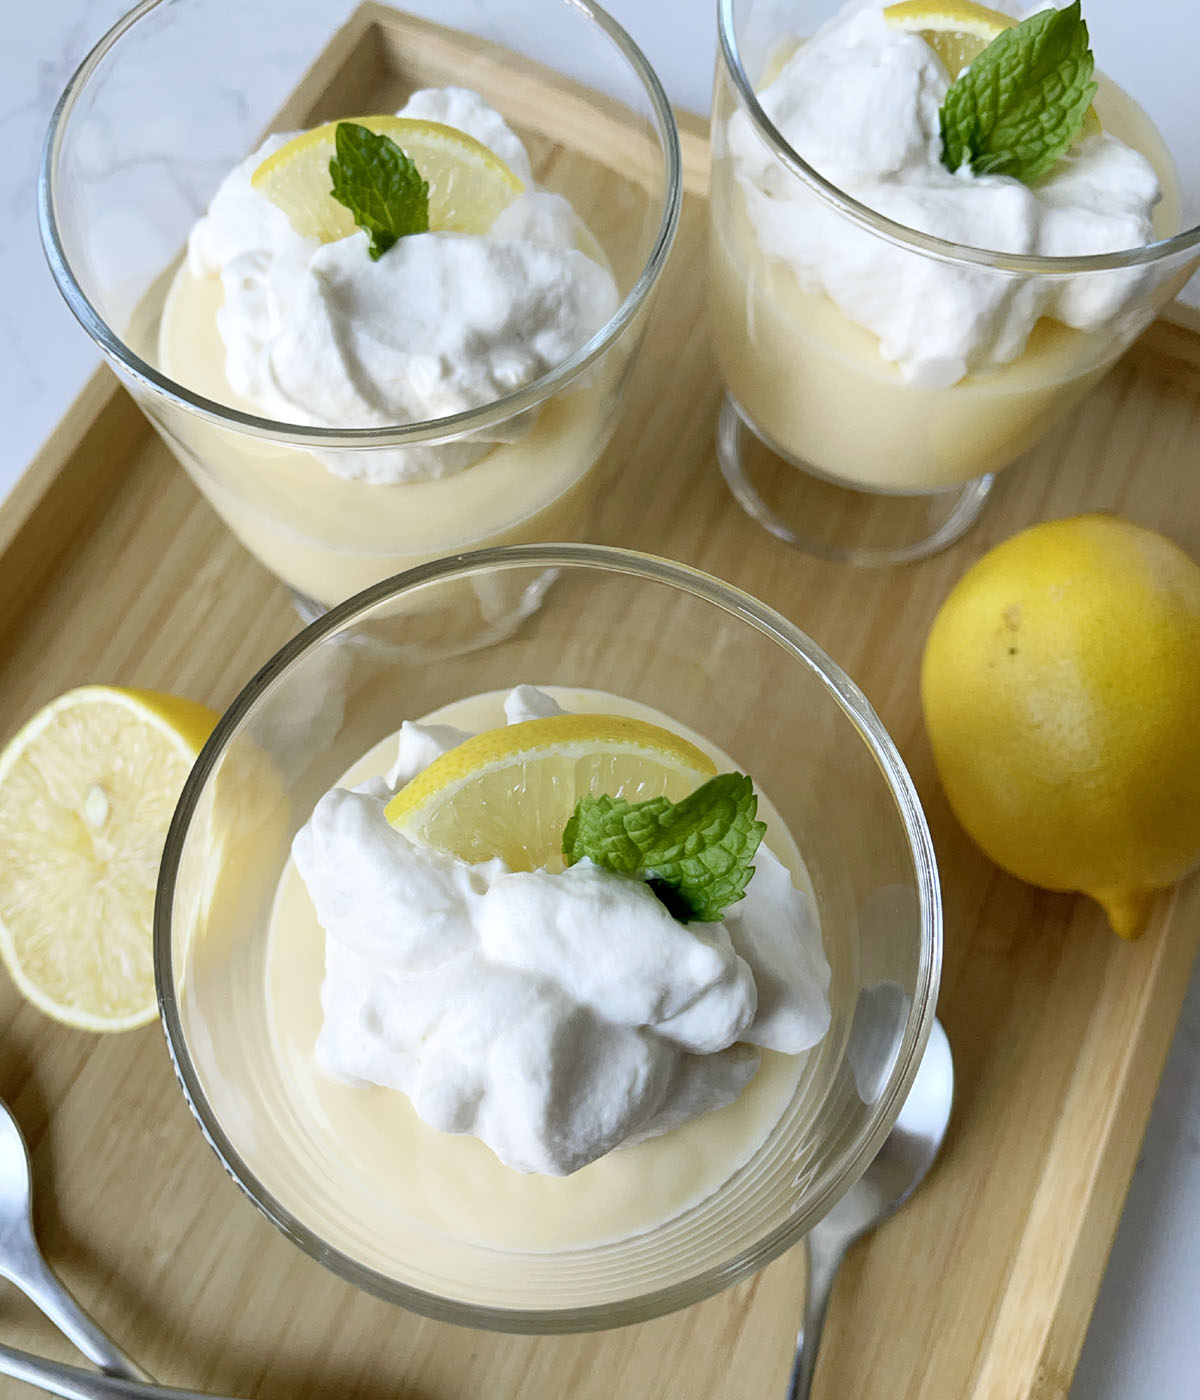 Three glass dishes containing yellow pudding, whipped cream, a lemon wedge, and spearmint leaf.